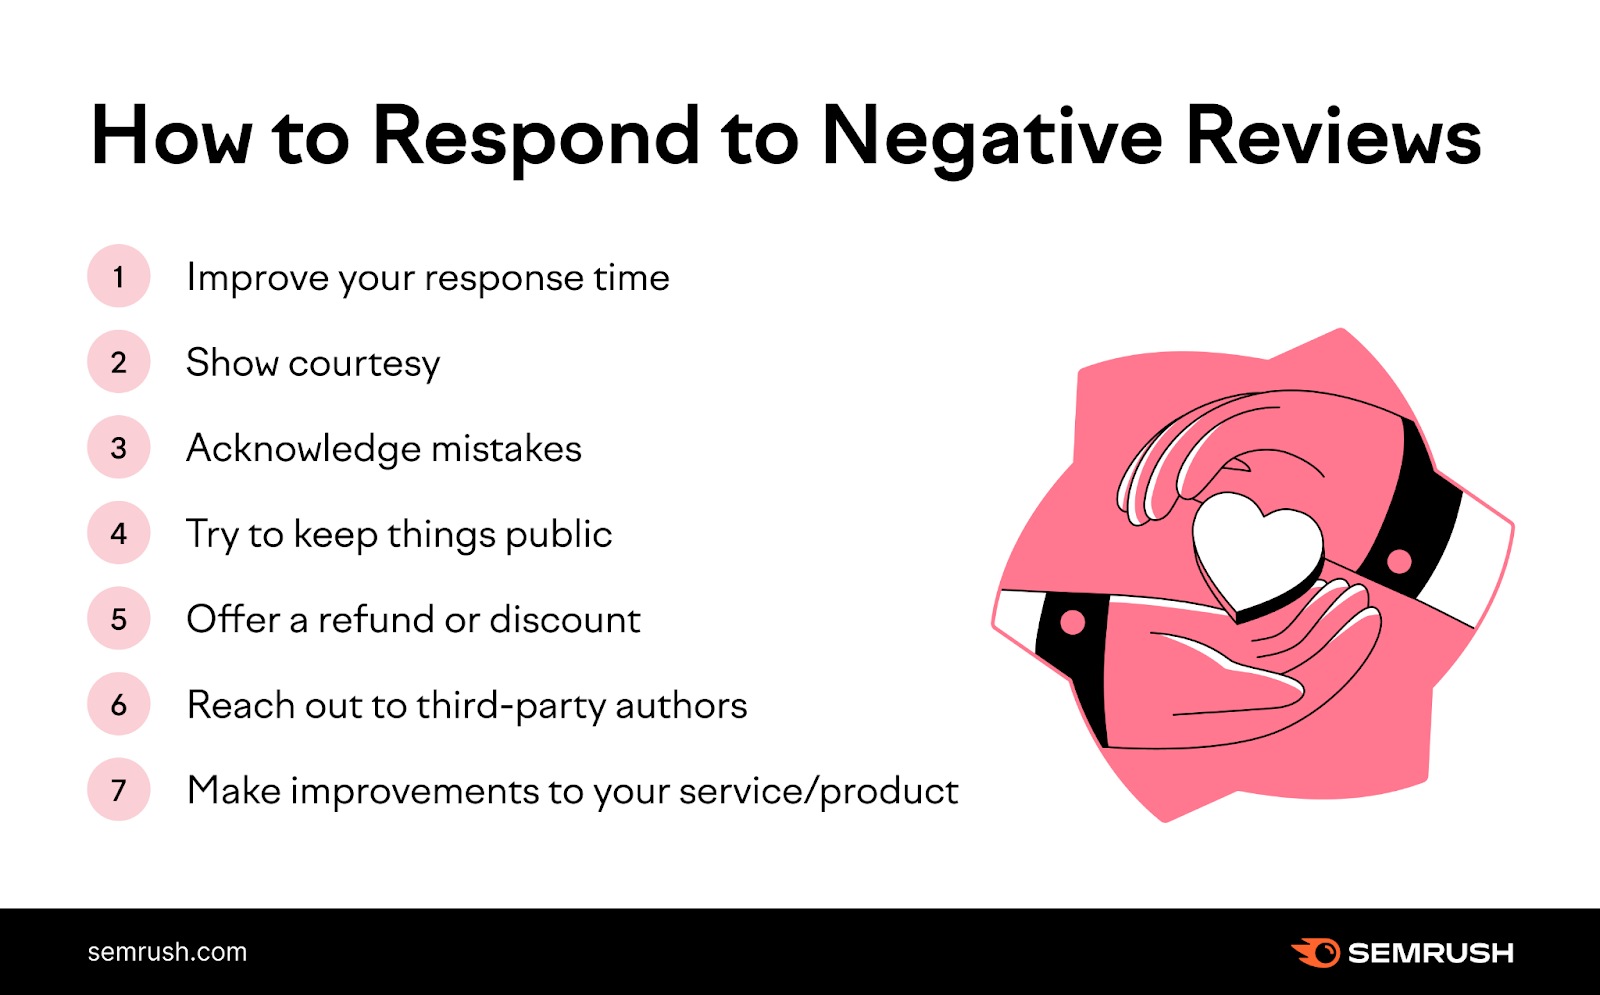 Respond to negative review: improve response time, s،w courtesy, acknowledge mistakes, keep it public, offer refund or discount, reach out to third-party aut،rs, improve service/،uct.